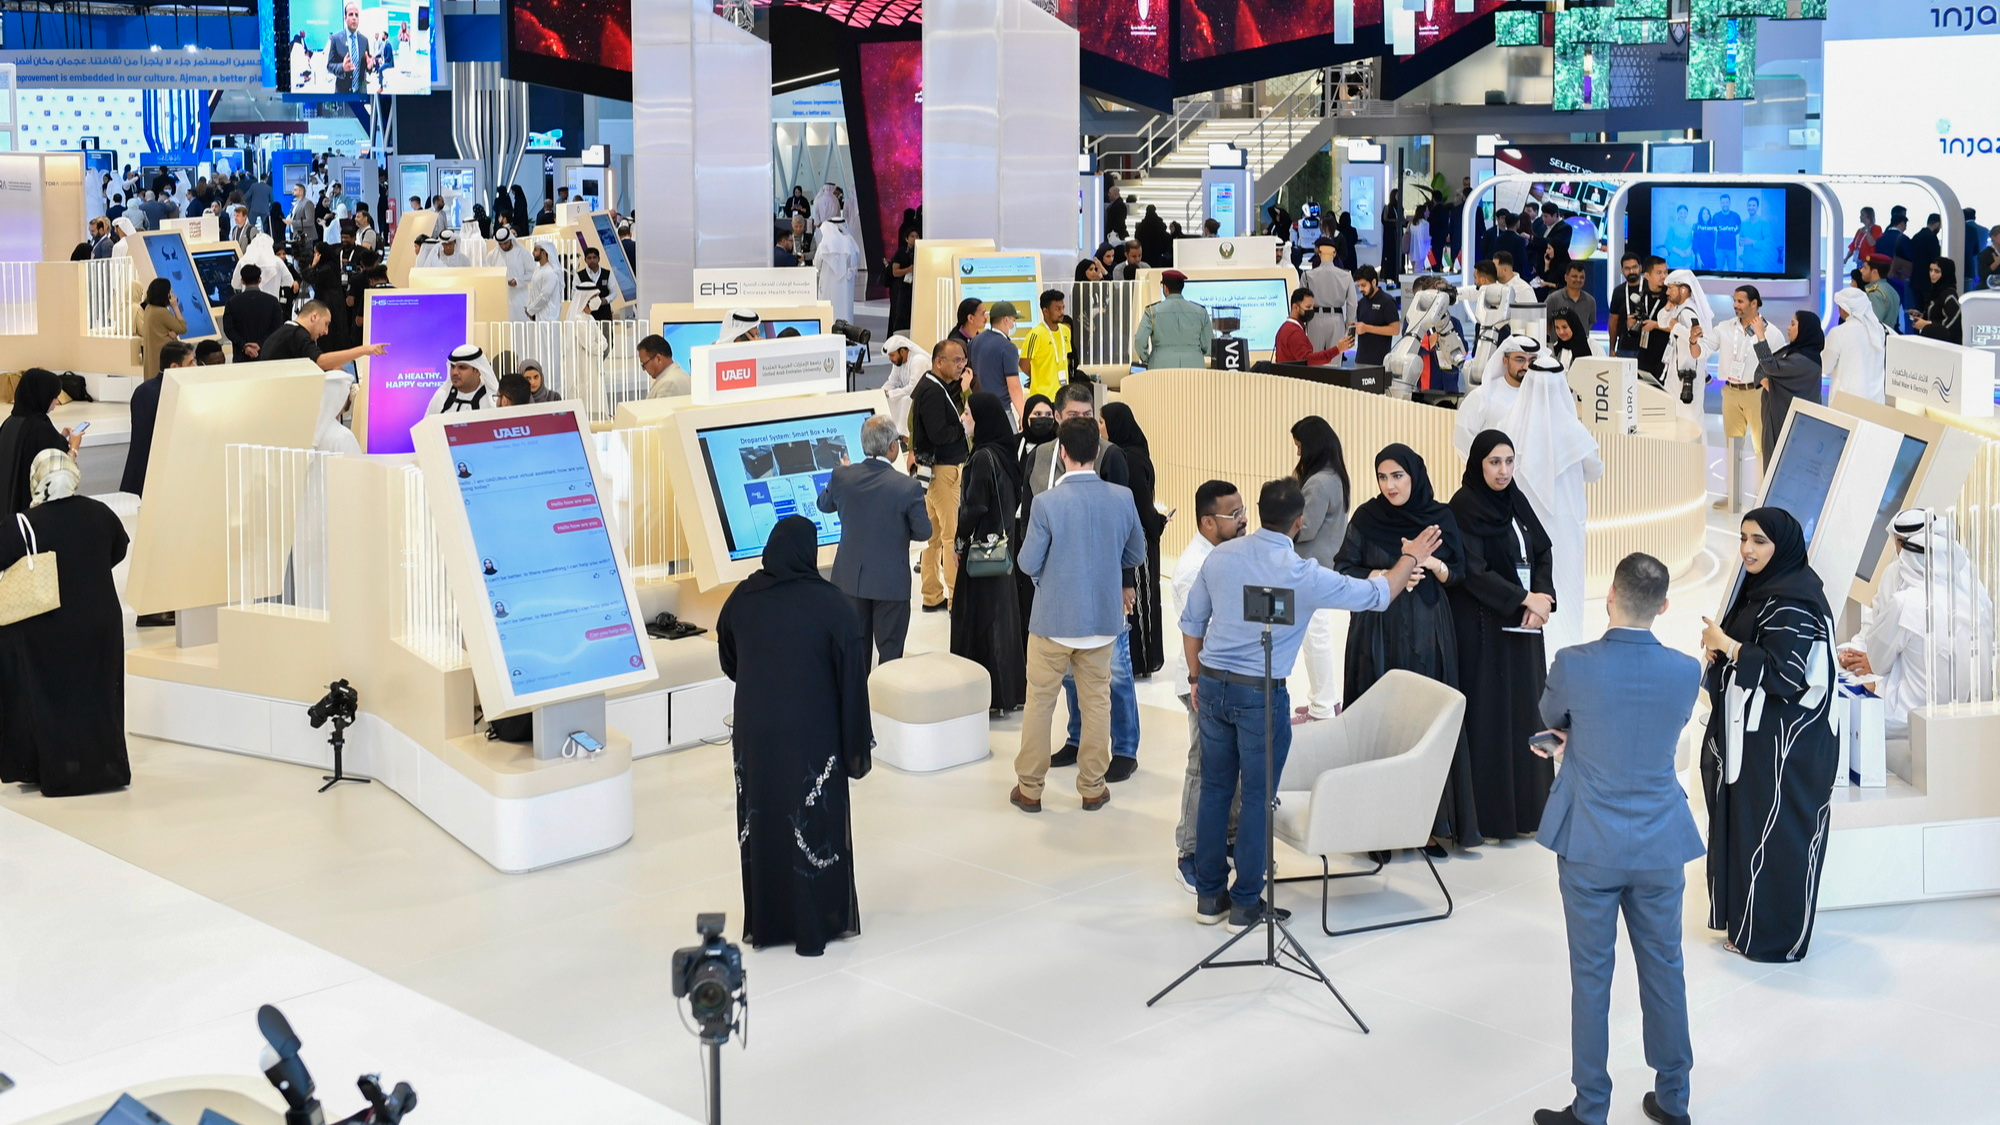 https://adgully.me/post/741/uaeu-participates-in-gitex-technology-week-2022